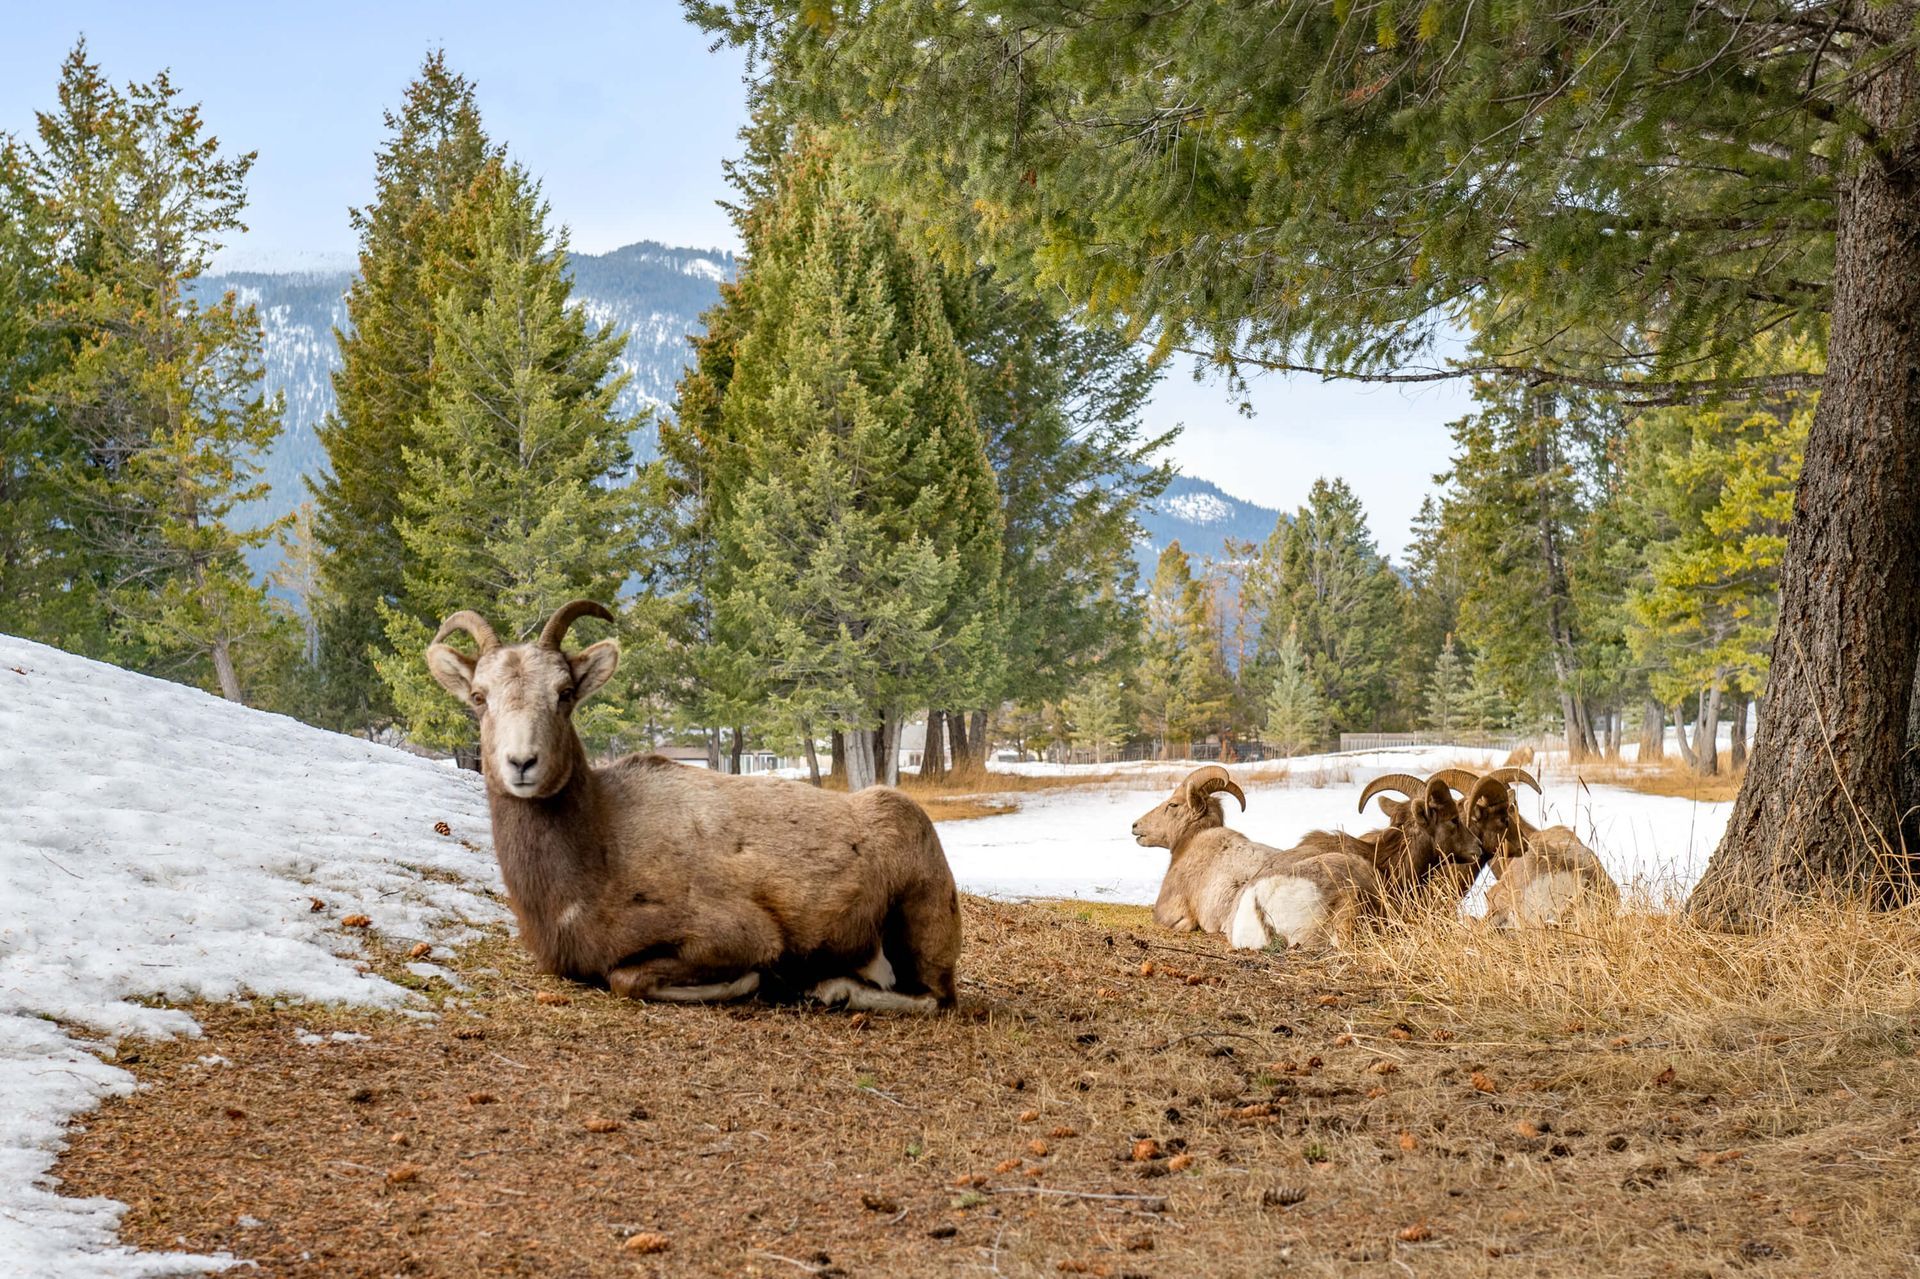 Big horn sheep outside of Wide Open Spaces, a Radium BC Vacation Rental hosted by Aisling Baile Property Management.